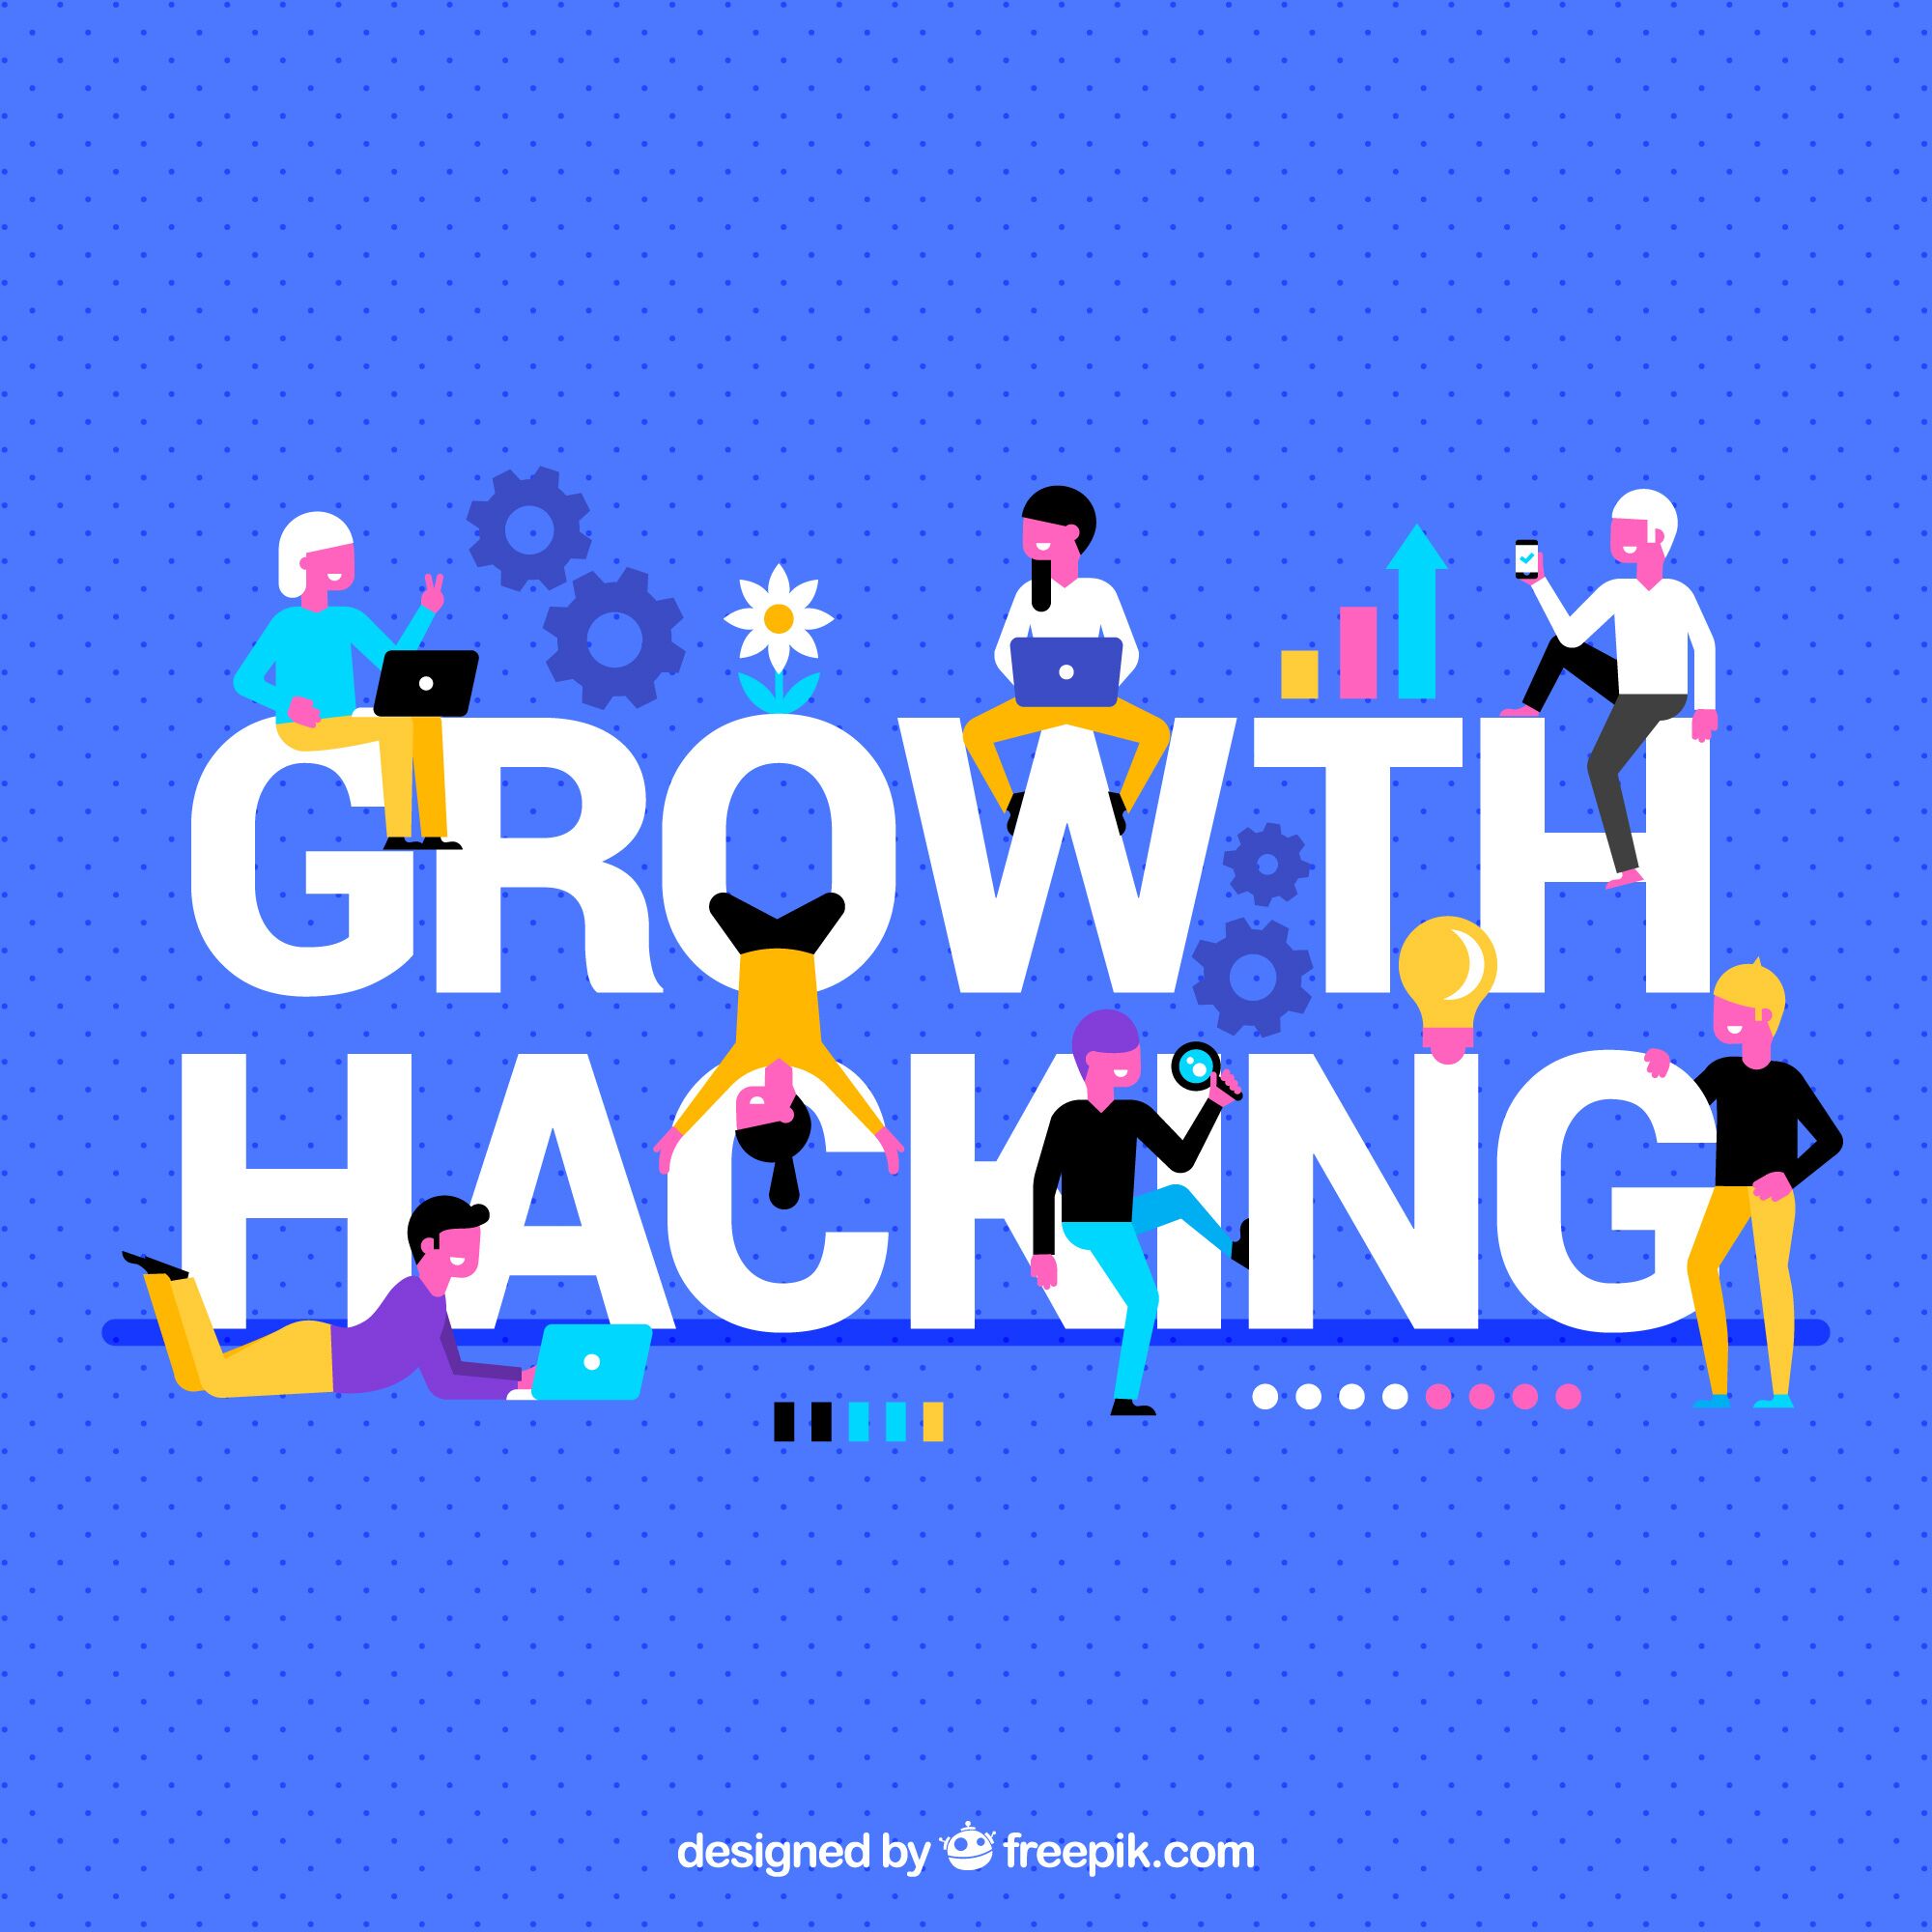 Growth Hacking: The What, Why & How